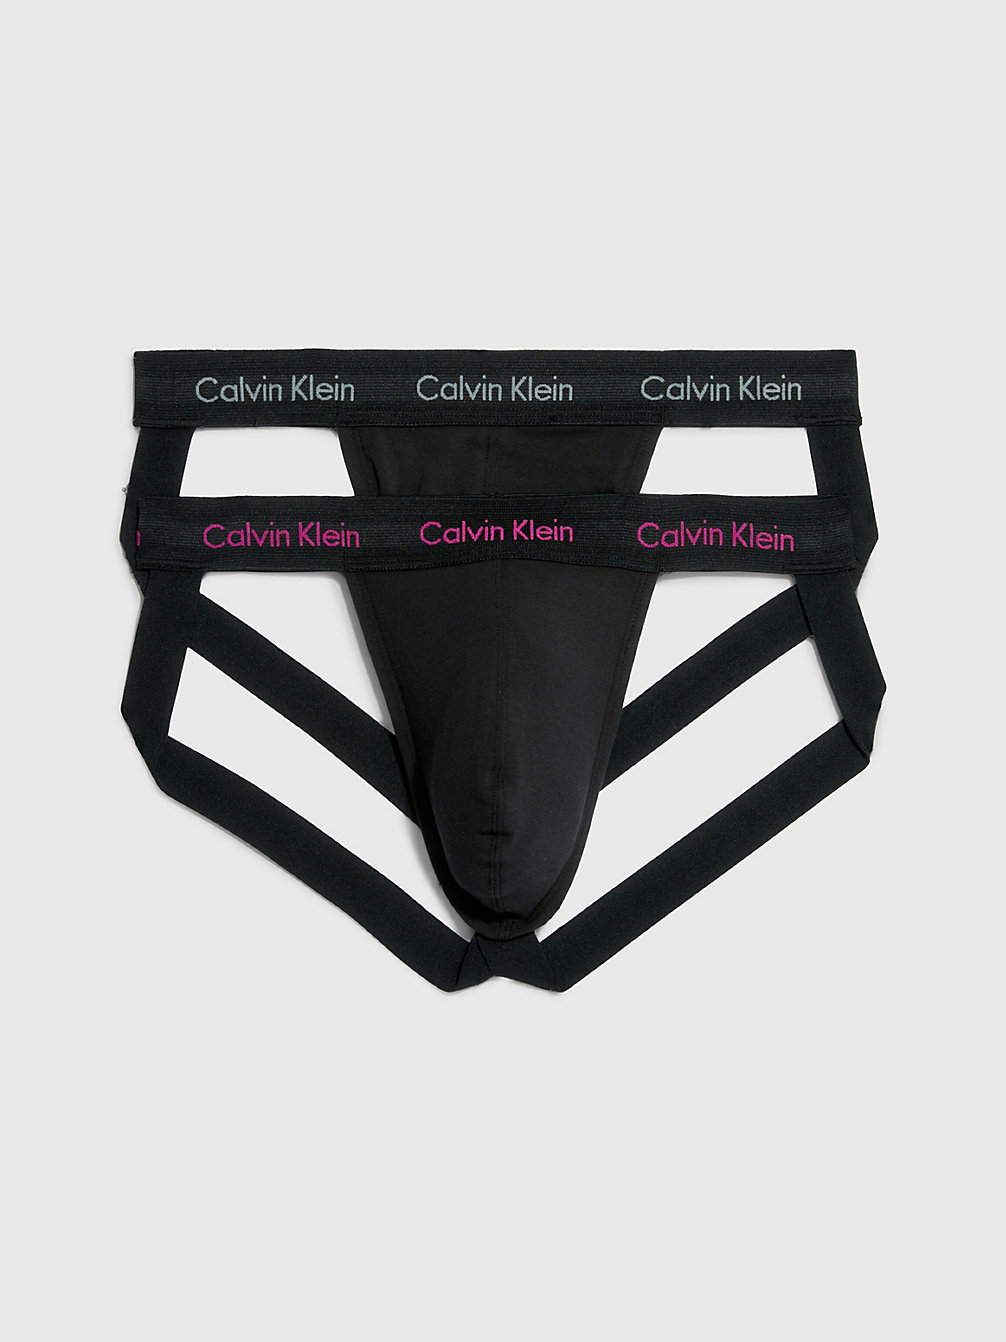 Lot De 2 Strings - Cotton Stretch > B-SILVER SPRINGS, PALACE PINK LOGO > undefined hommes > Calvin Klein